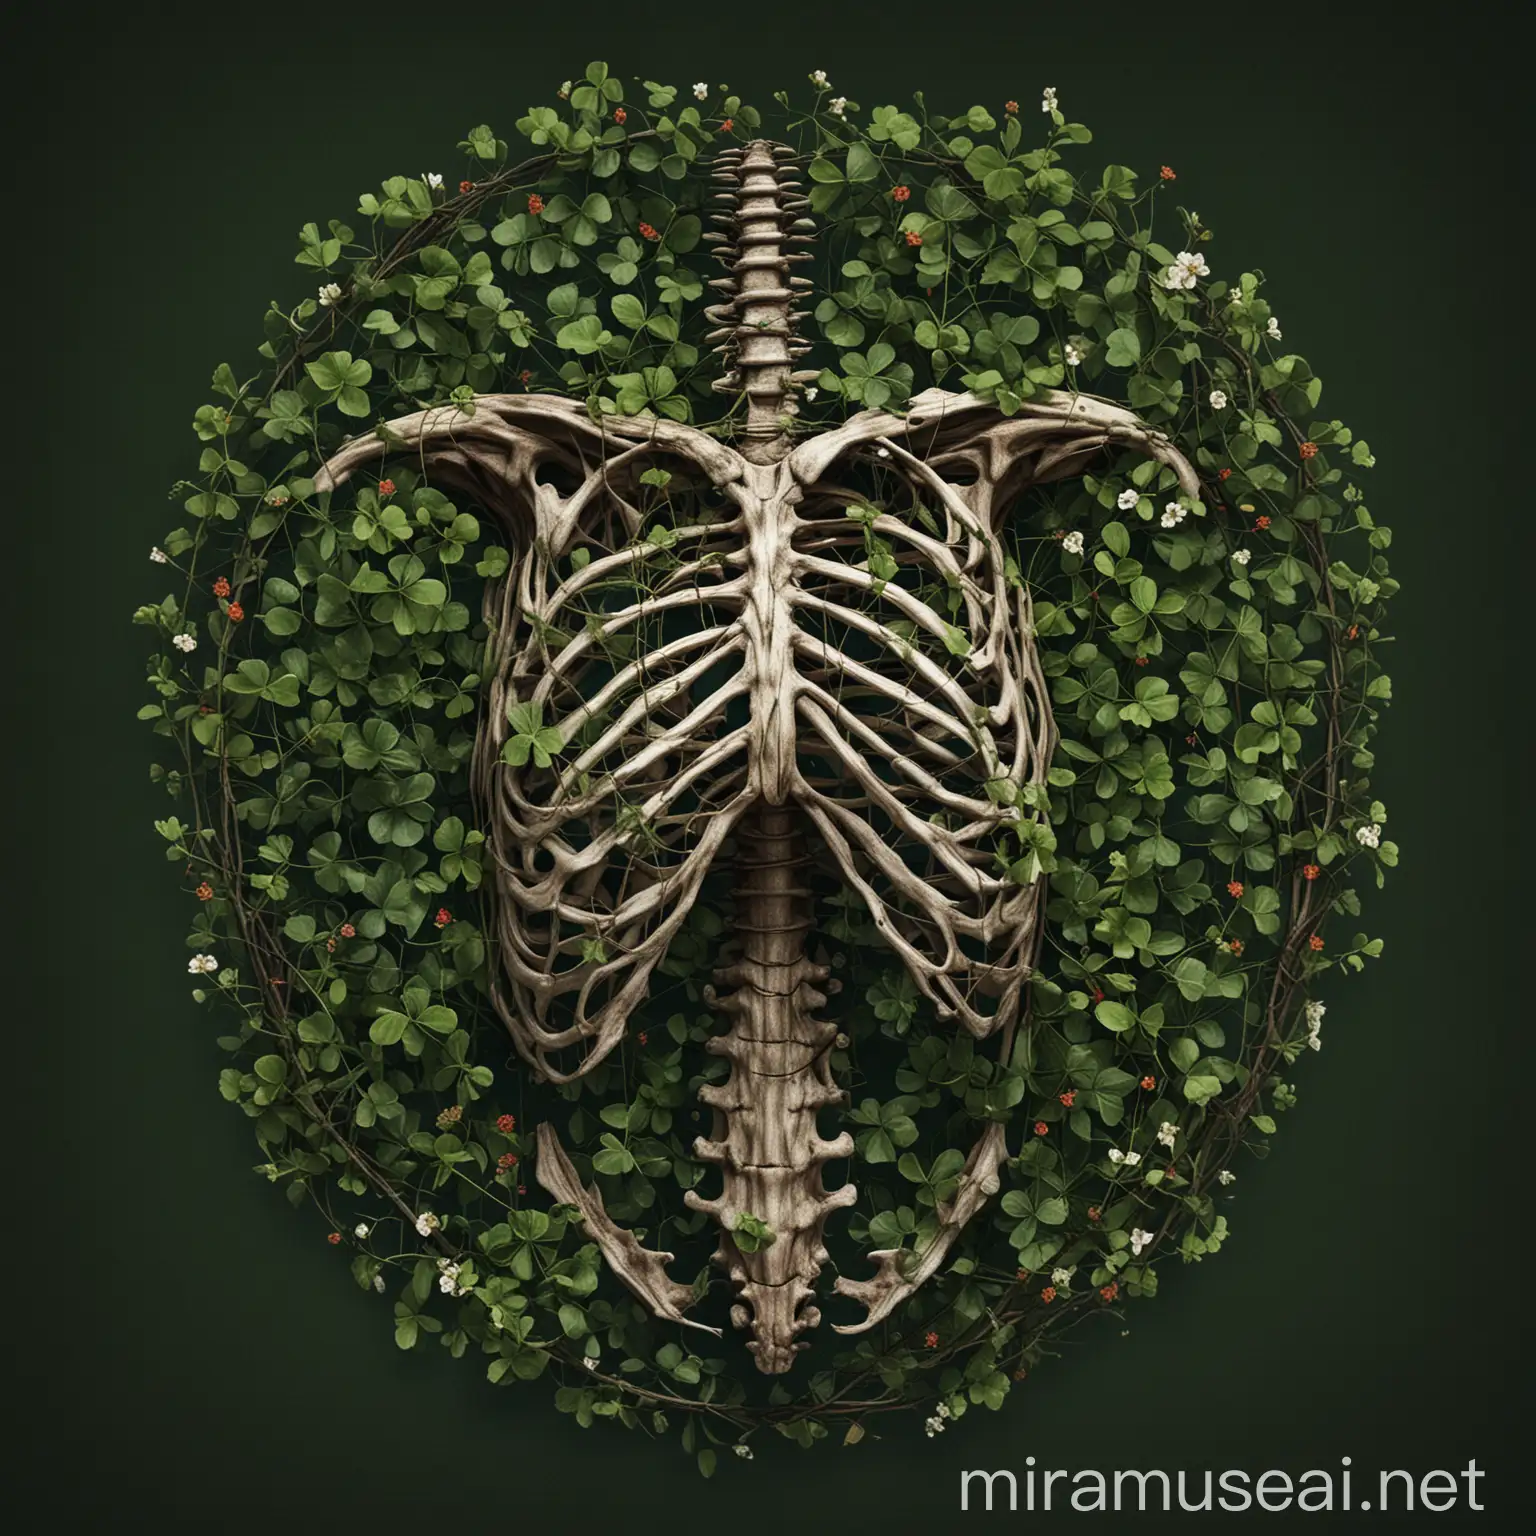 Ribcage Filled with Clovers and Thorns